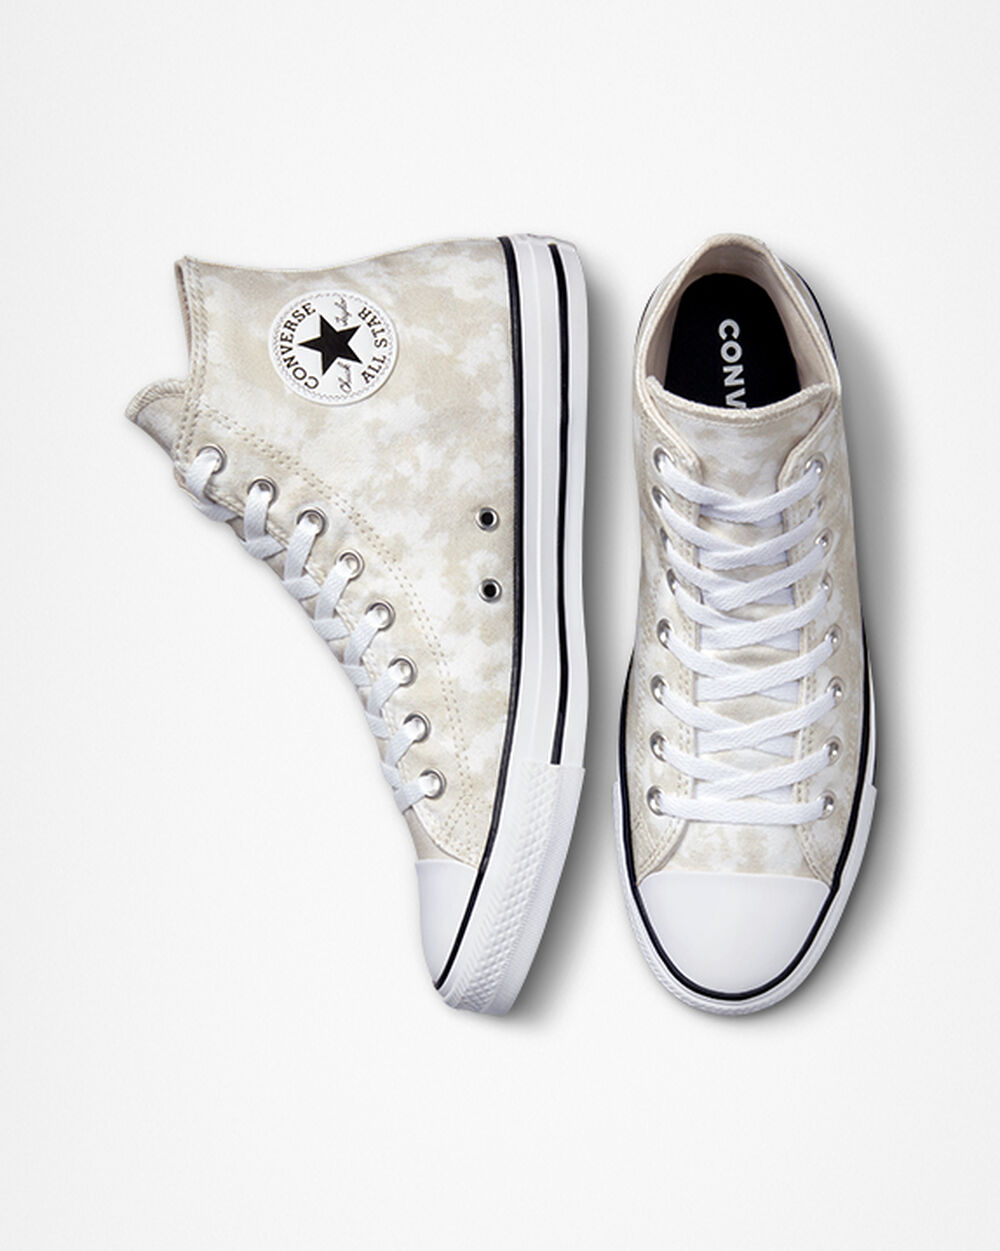 Tenis Converse Chuck Taylor All Star Mujer Beige Blancos Negros | Mexico-687246